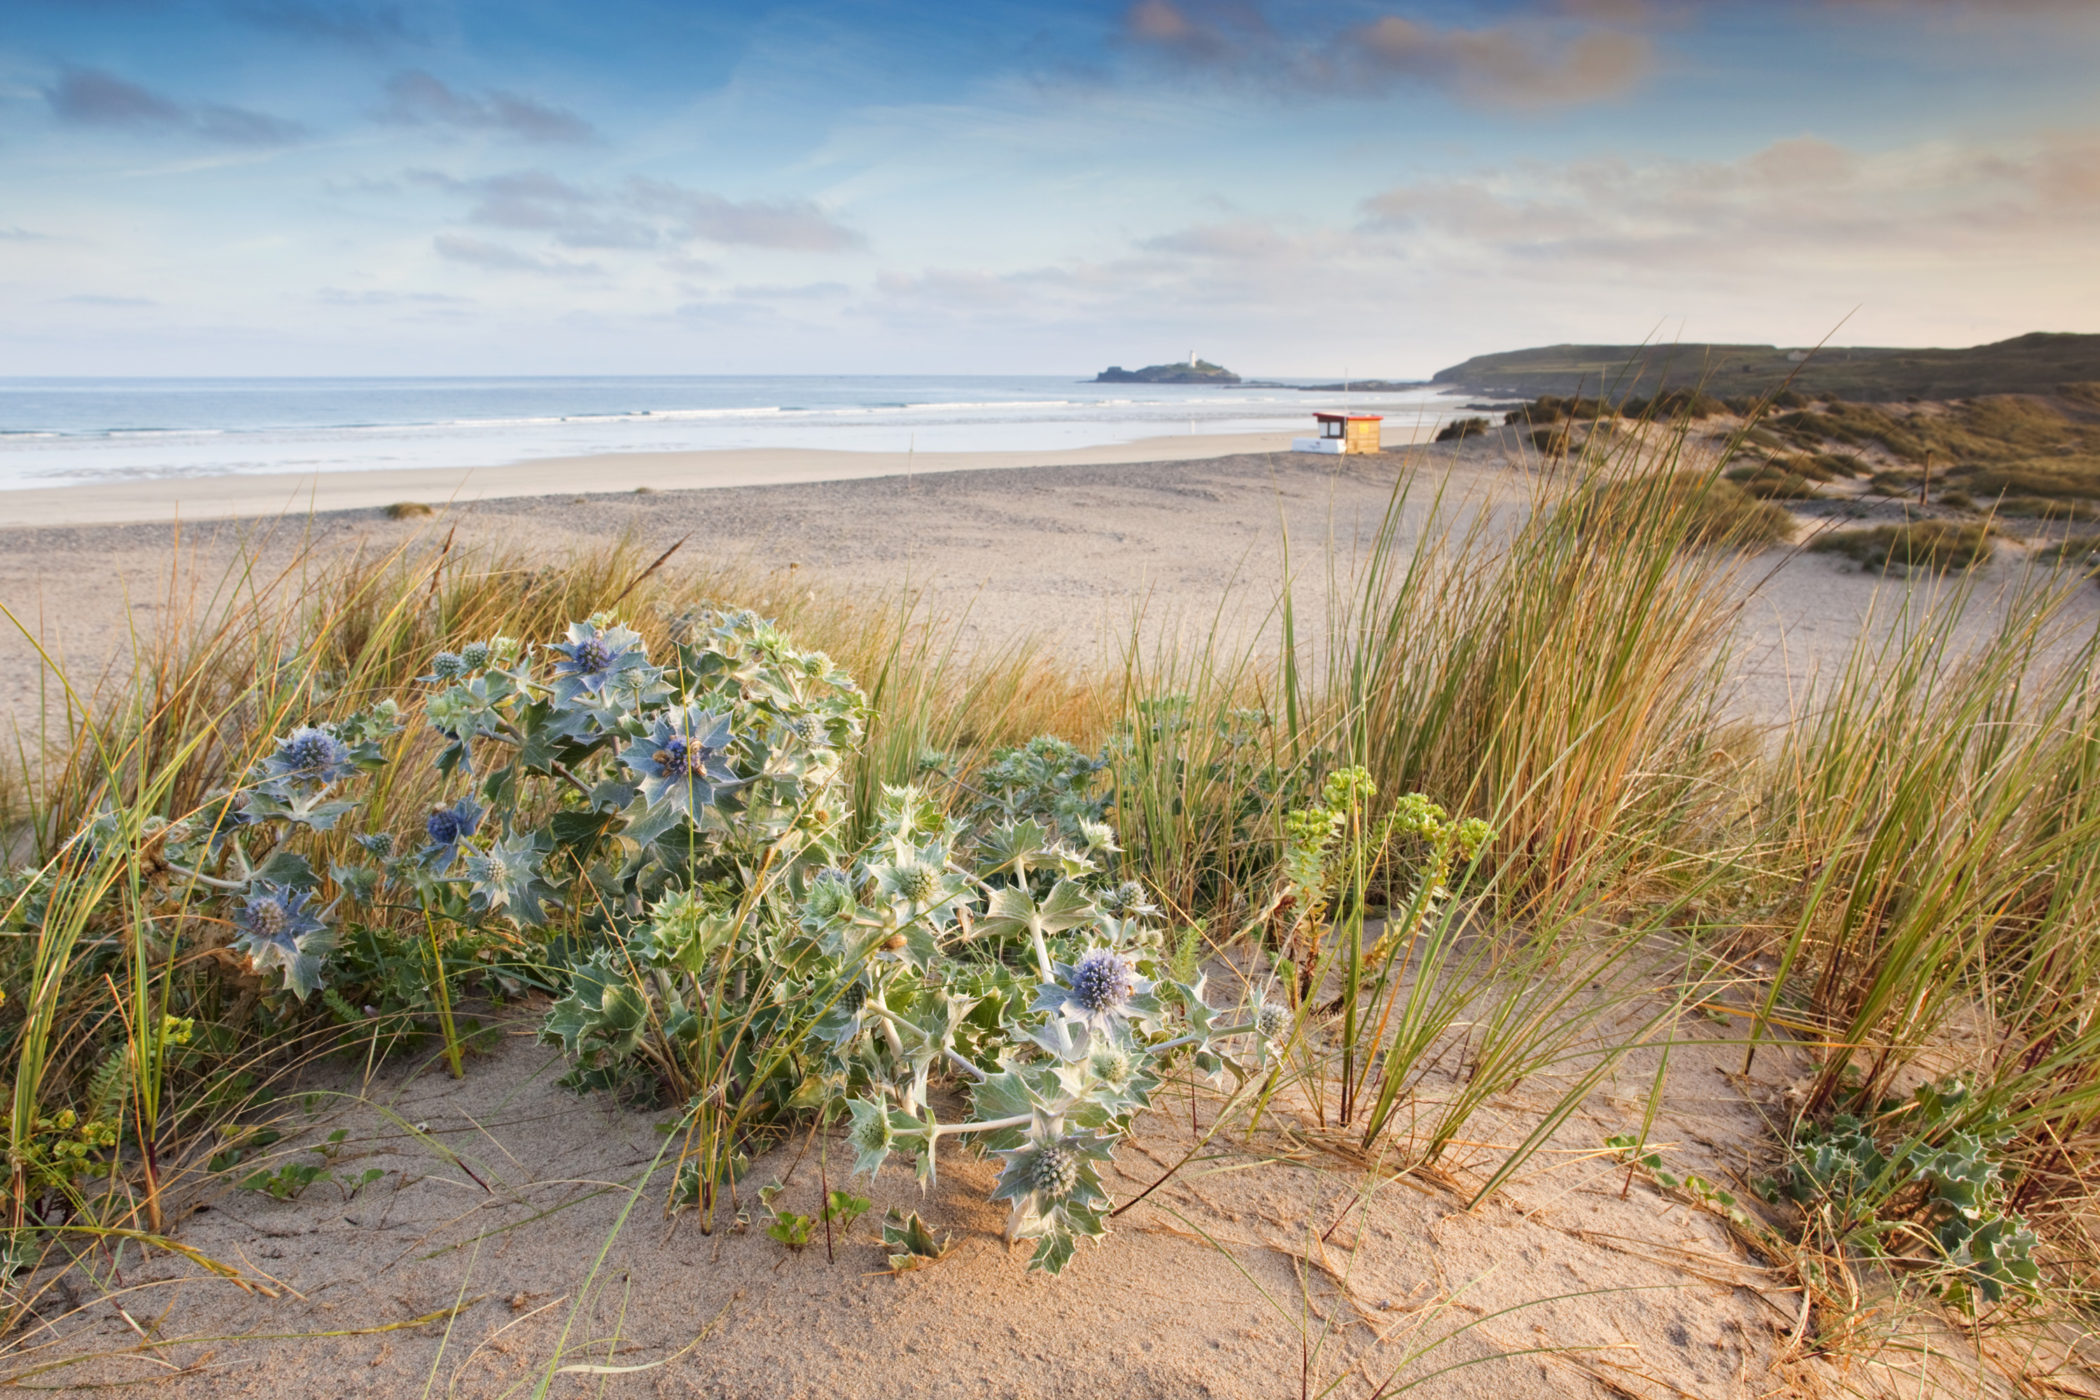 Sea holly at St Gothian Sands, seen here with sea spurge and marram grass. Credit: David Chapman